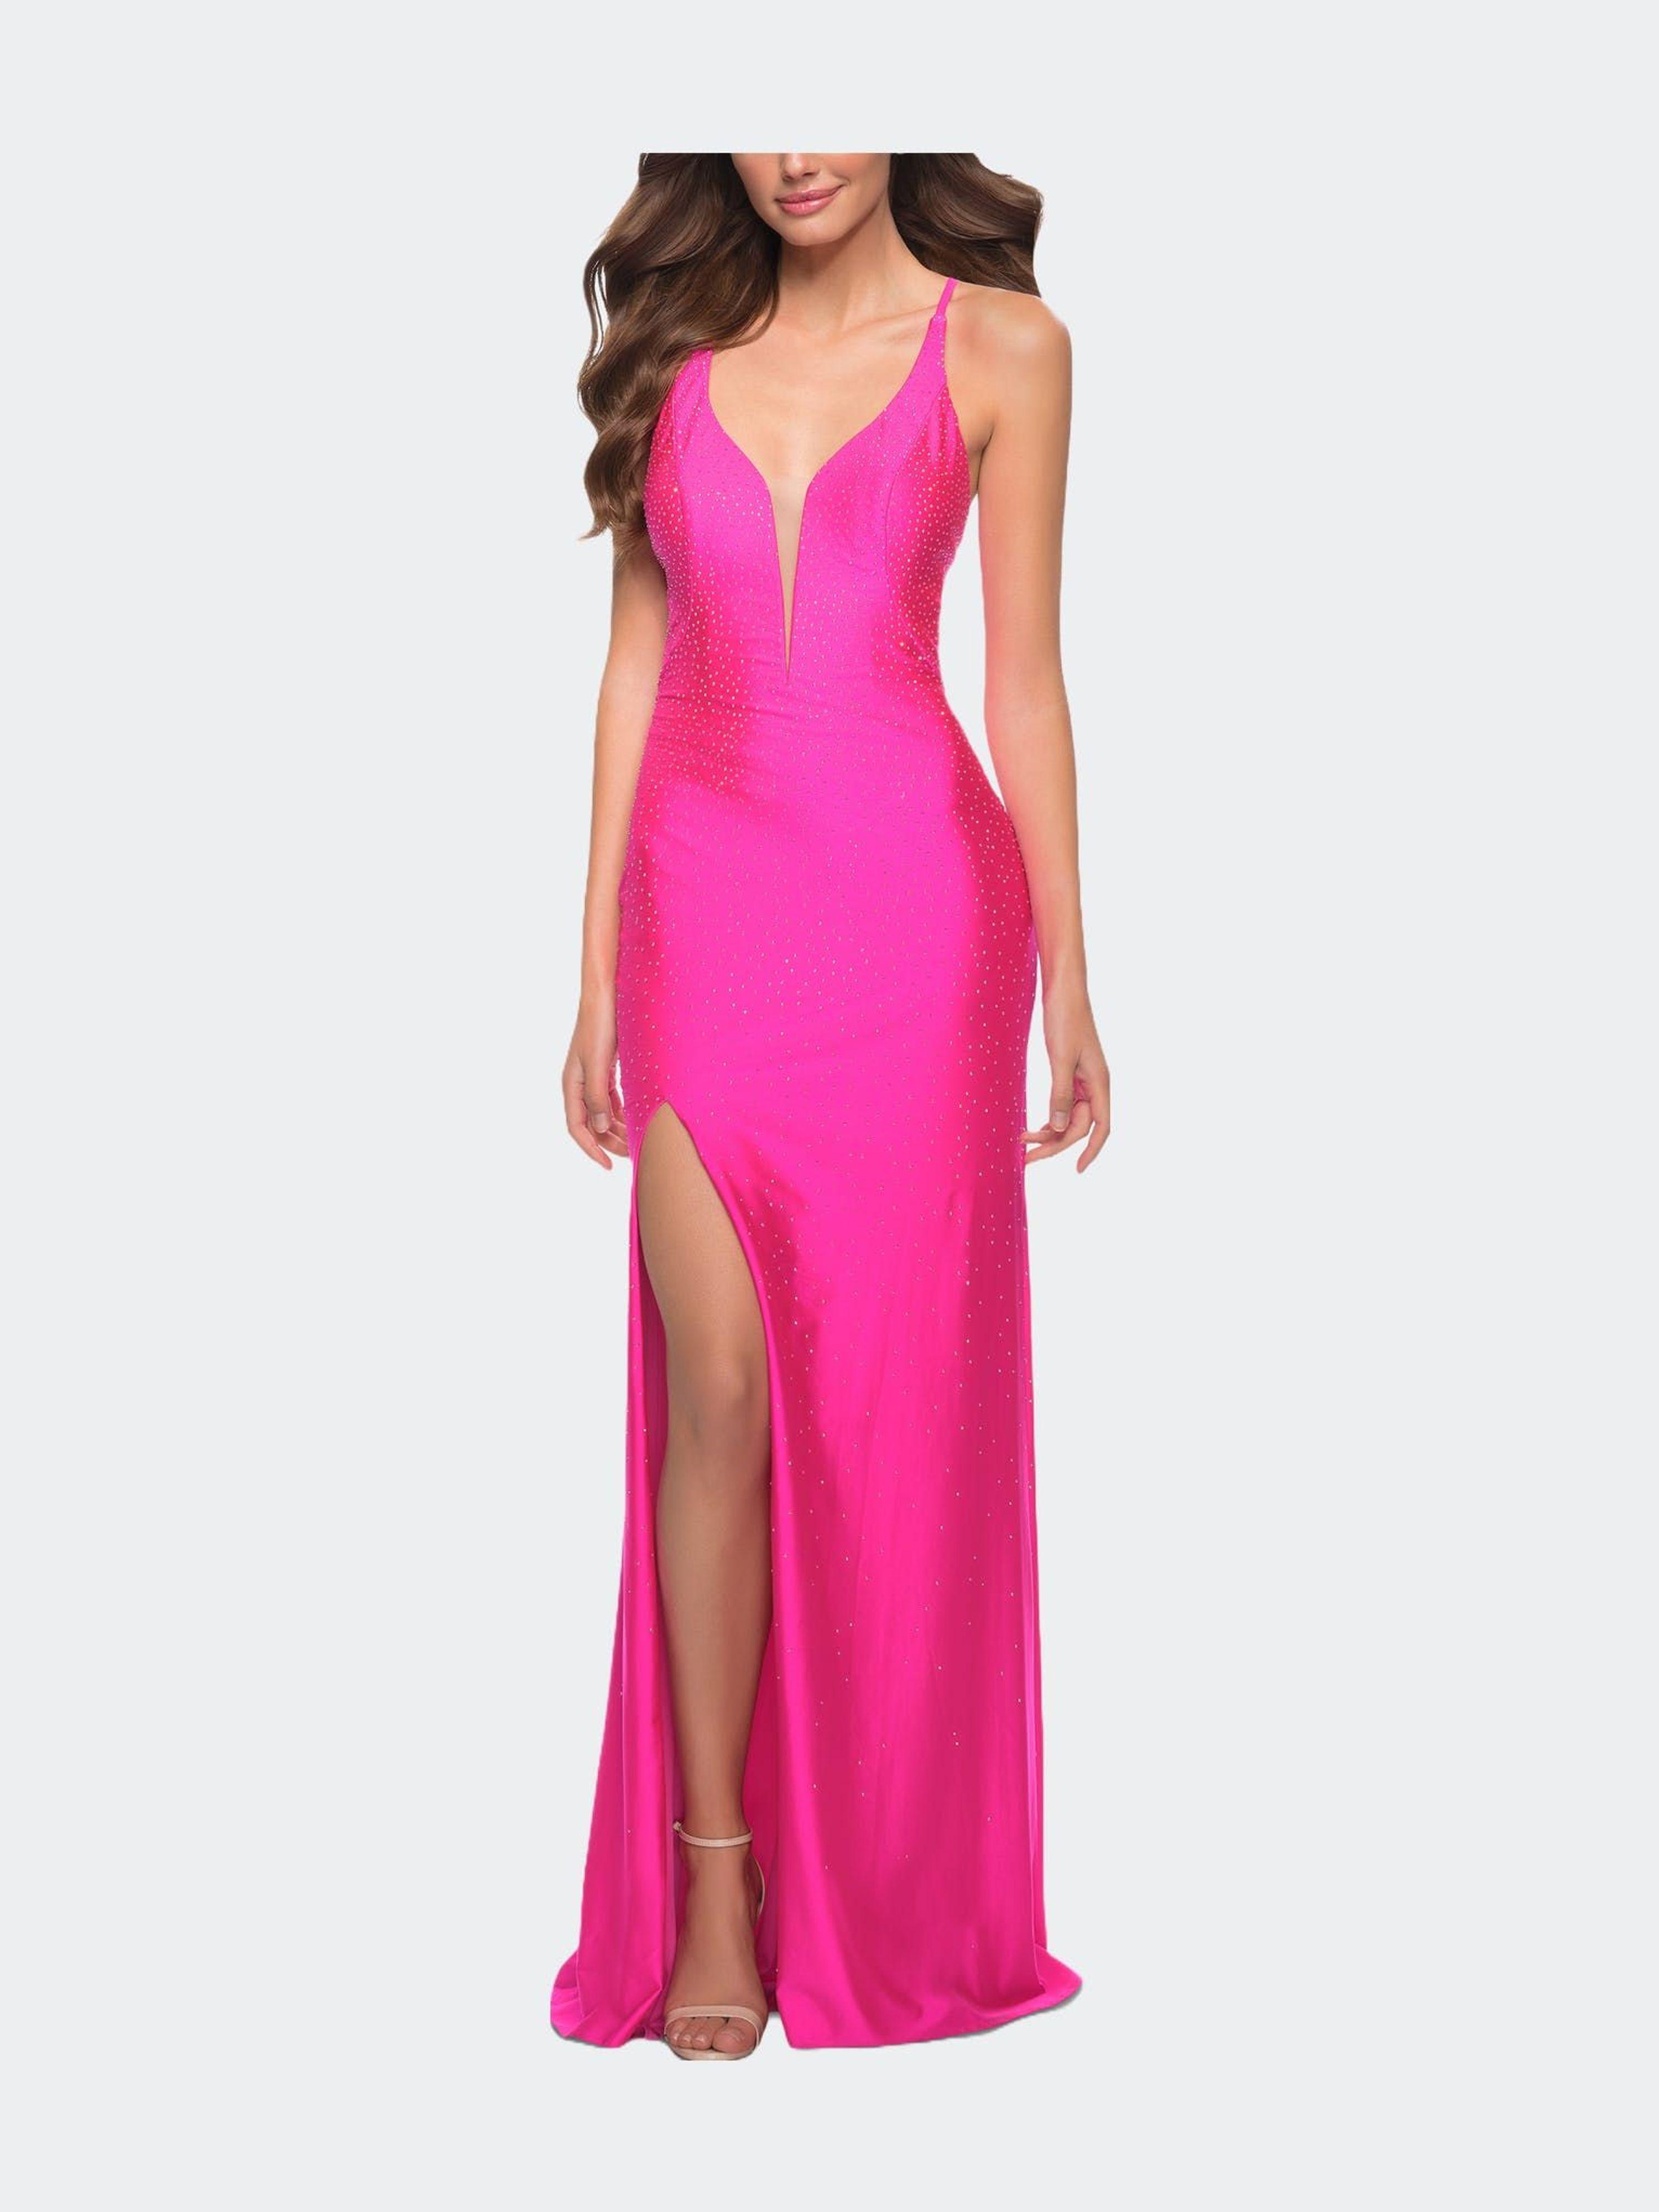 La Femme Neon Prom Gown With Rhinestone Fabric And Deep V in Pink | Lyst